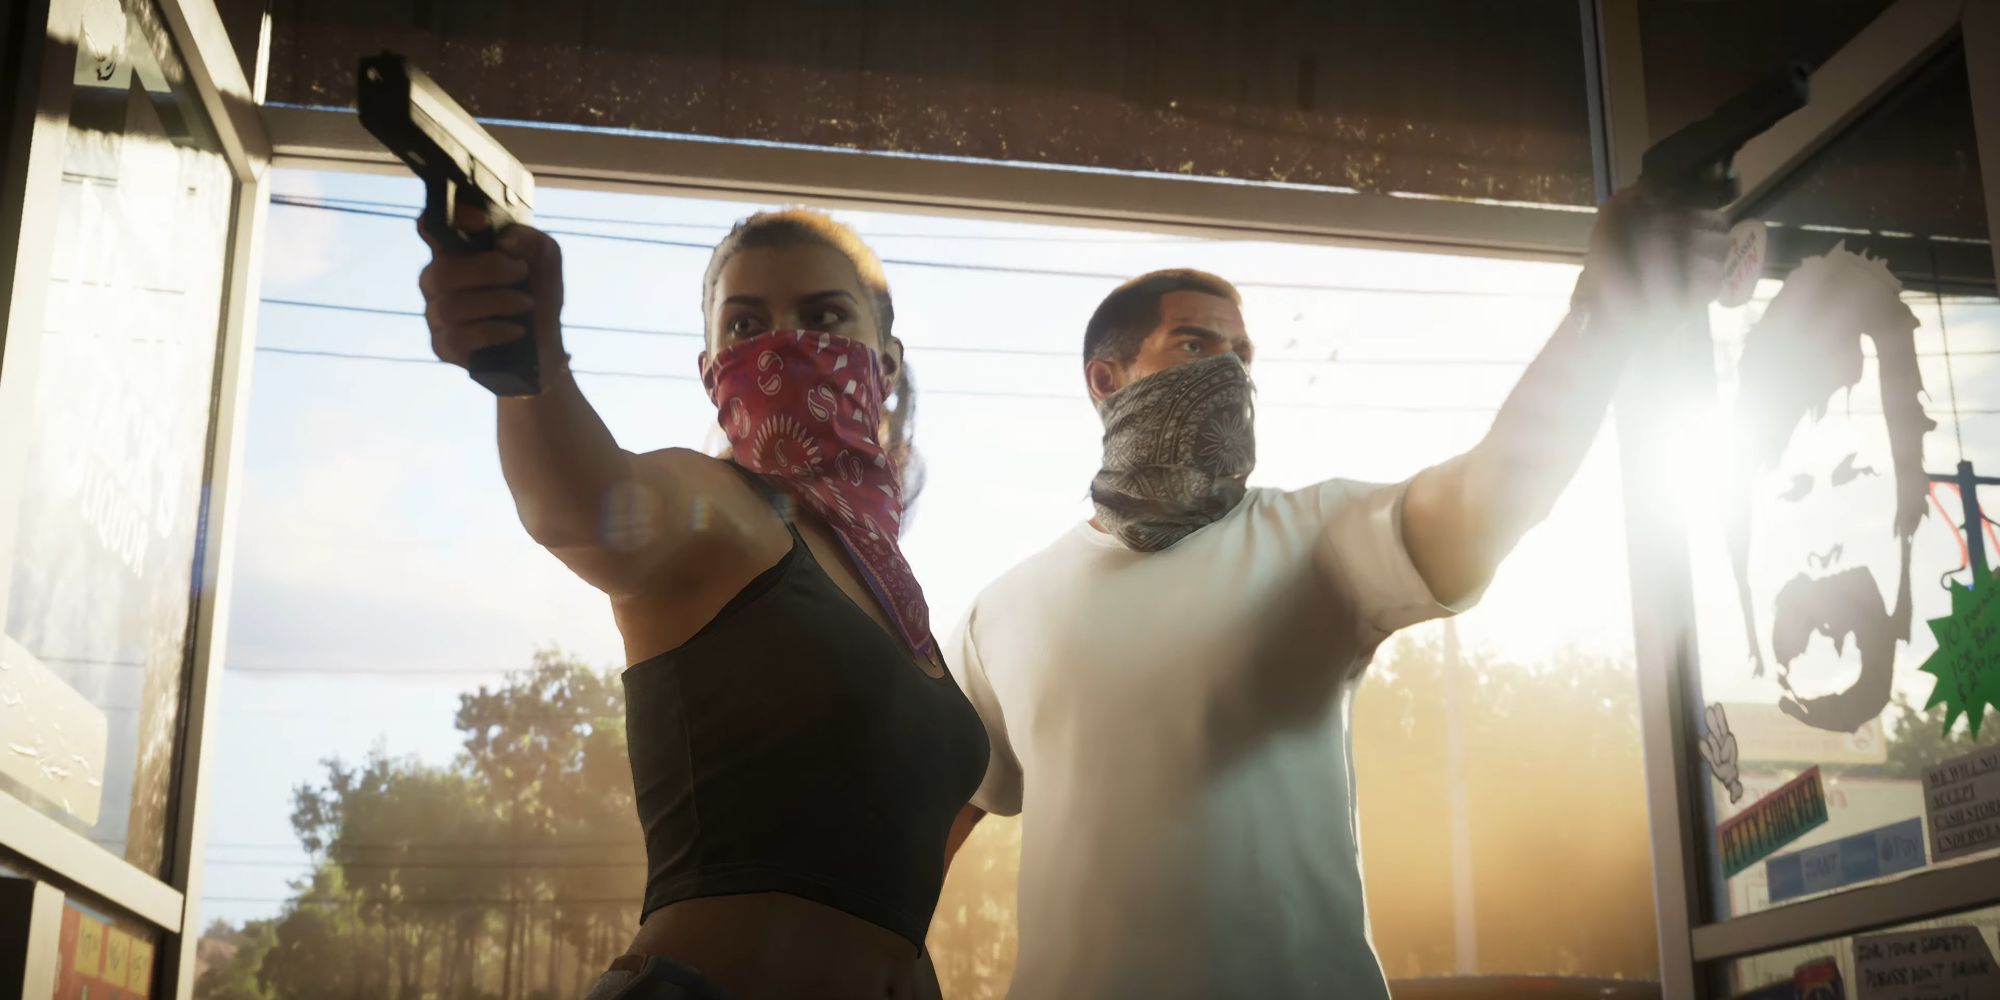 Two people opening double doors and pointing pistols. They both have bandanas tied around they lower half of their faces.